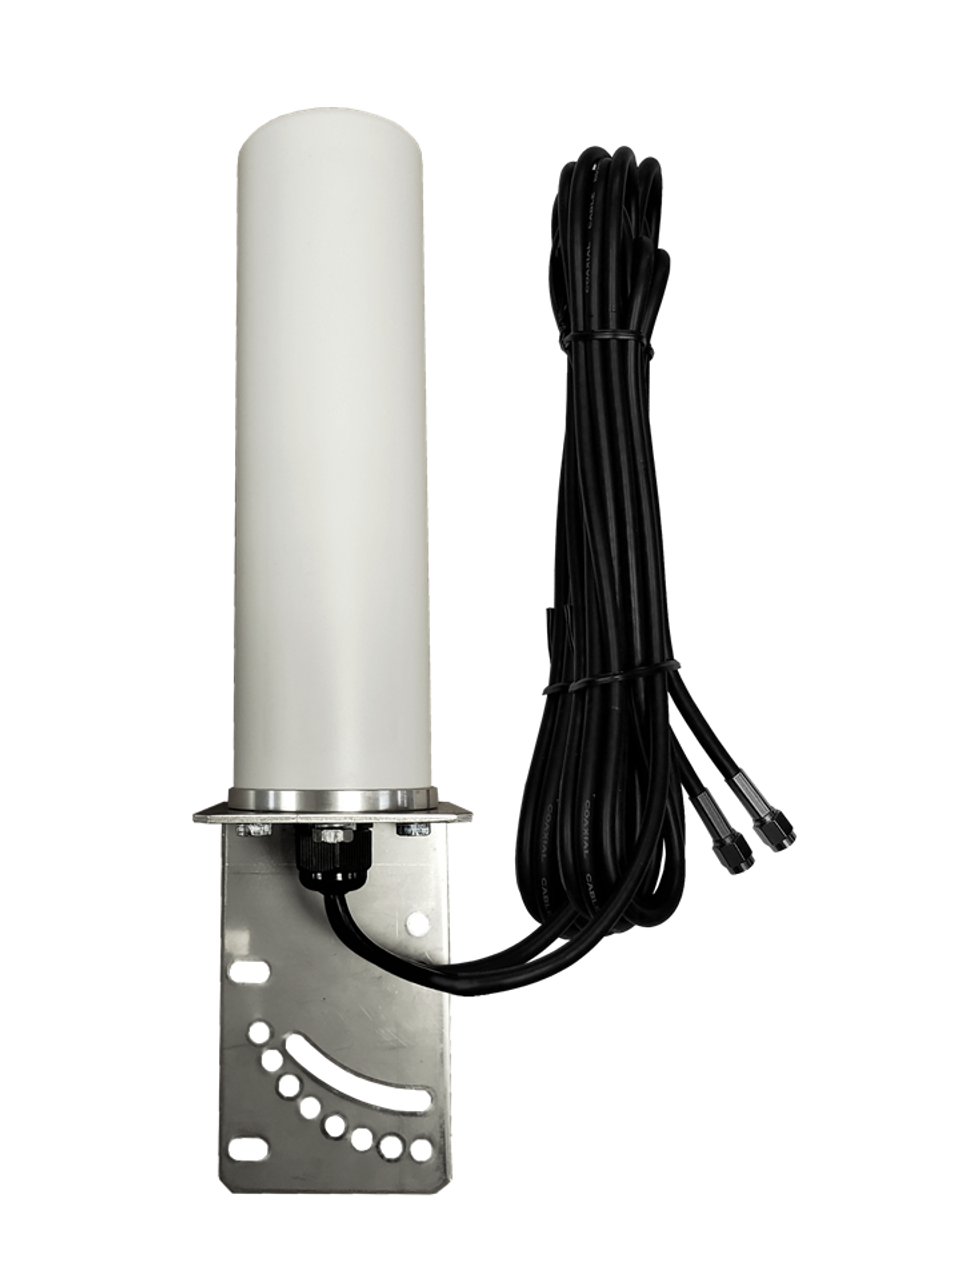 M19 M19 Omni Directional MIMO Cellular 4G 5G LTE AWS XLTE M2M IoT Antenna for Inseego Skyus-300V Gateway w/16ft Coax Cables - 2  x SMA